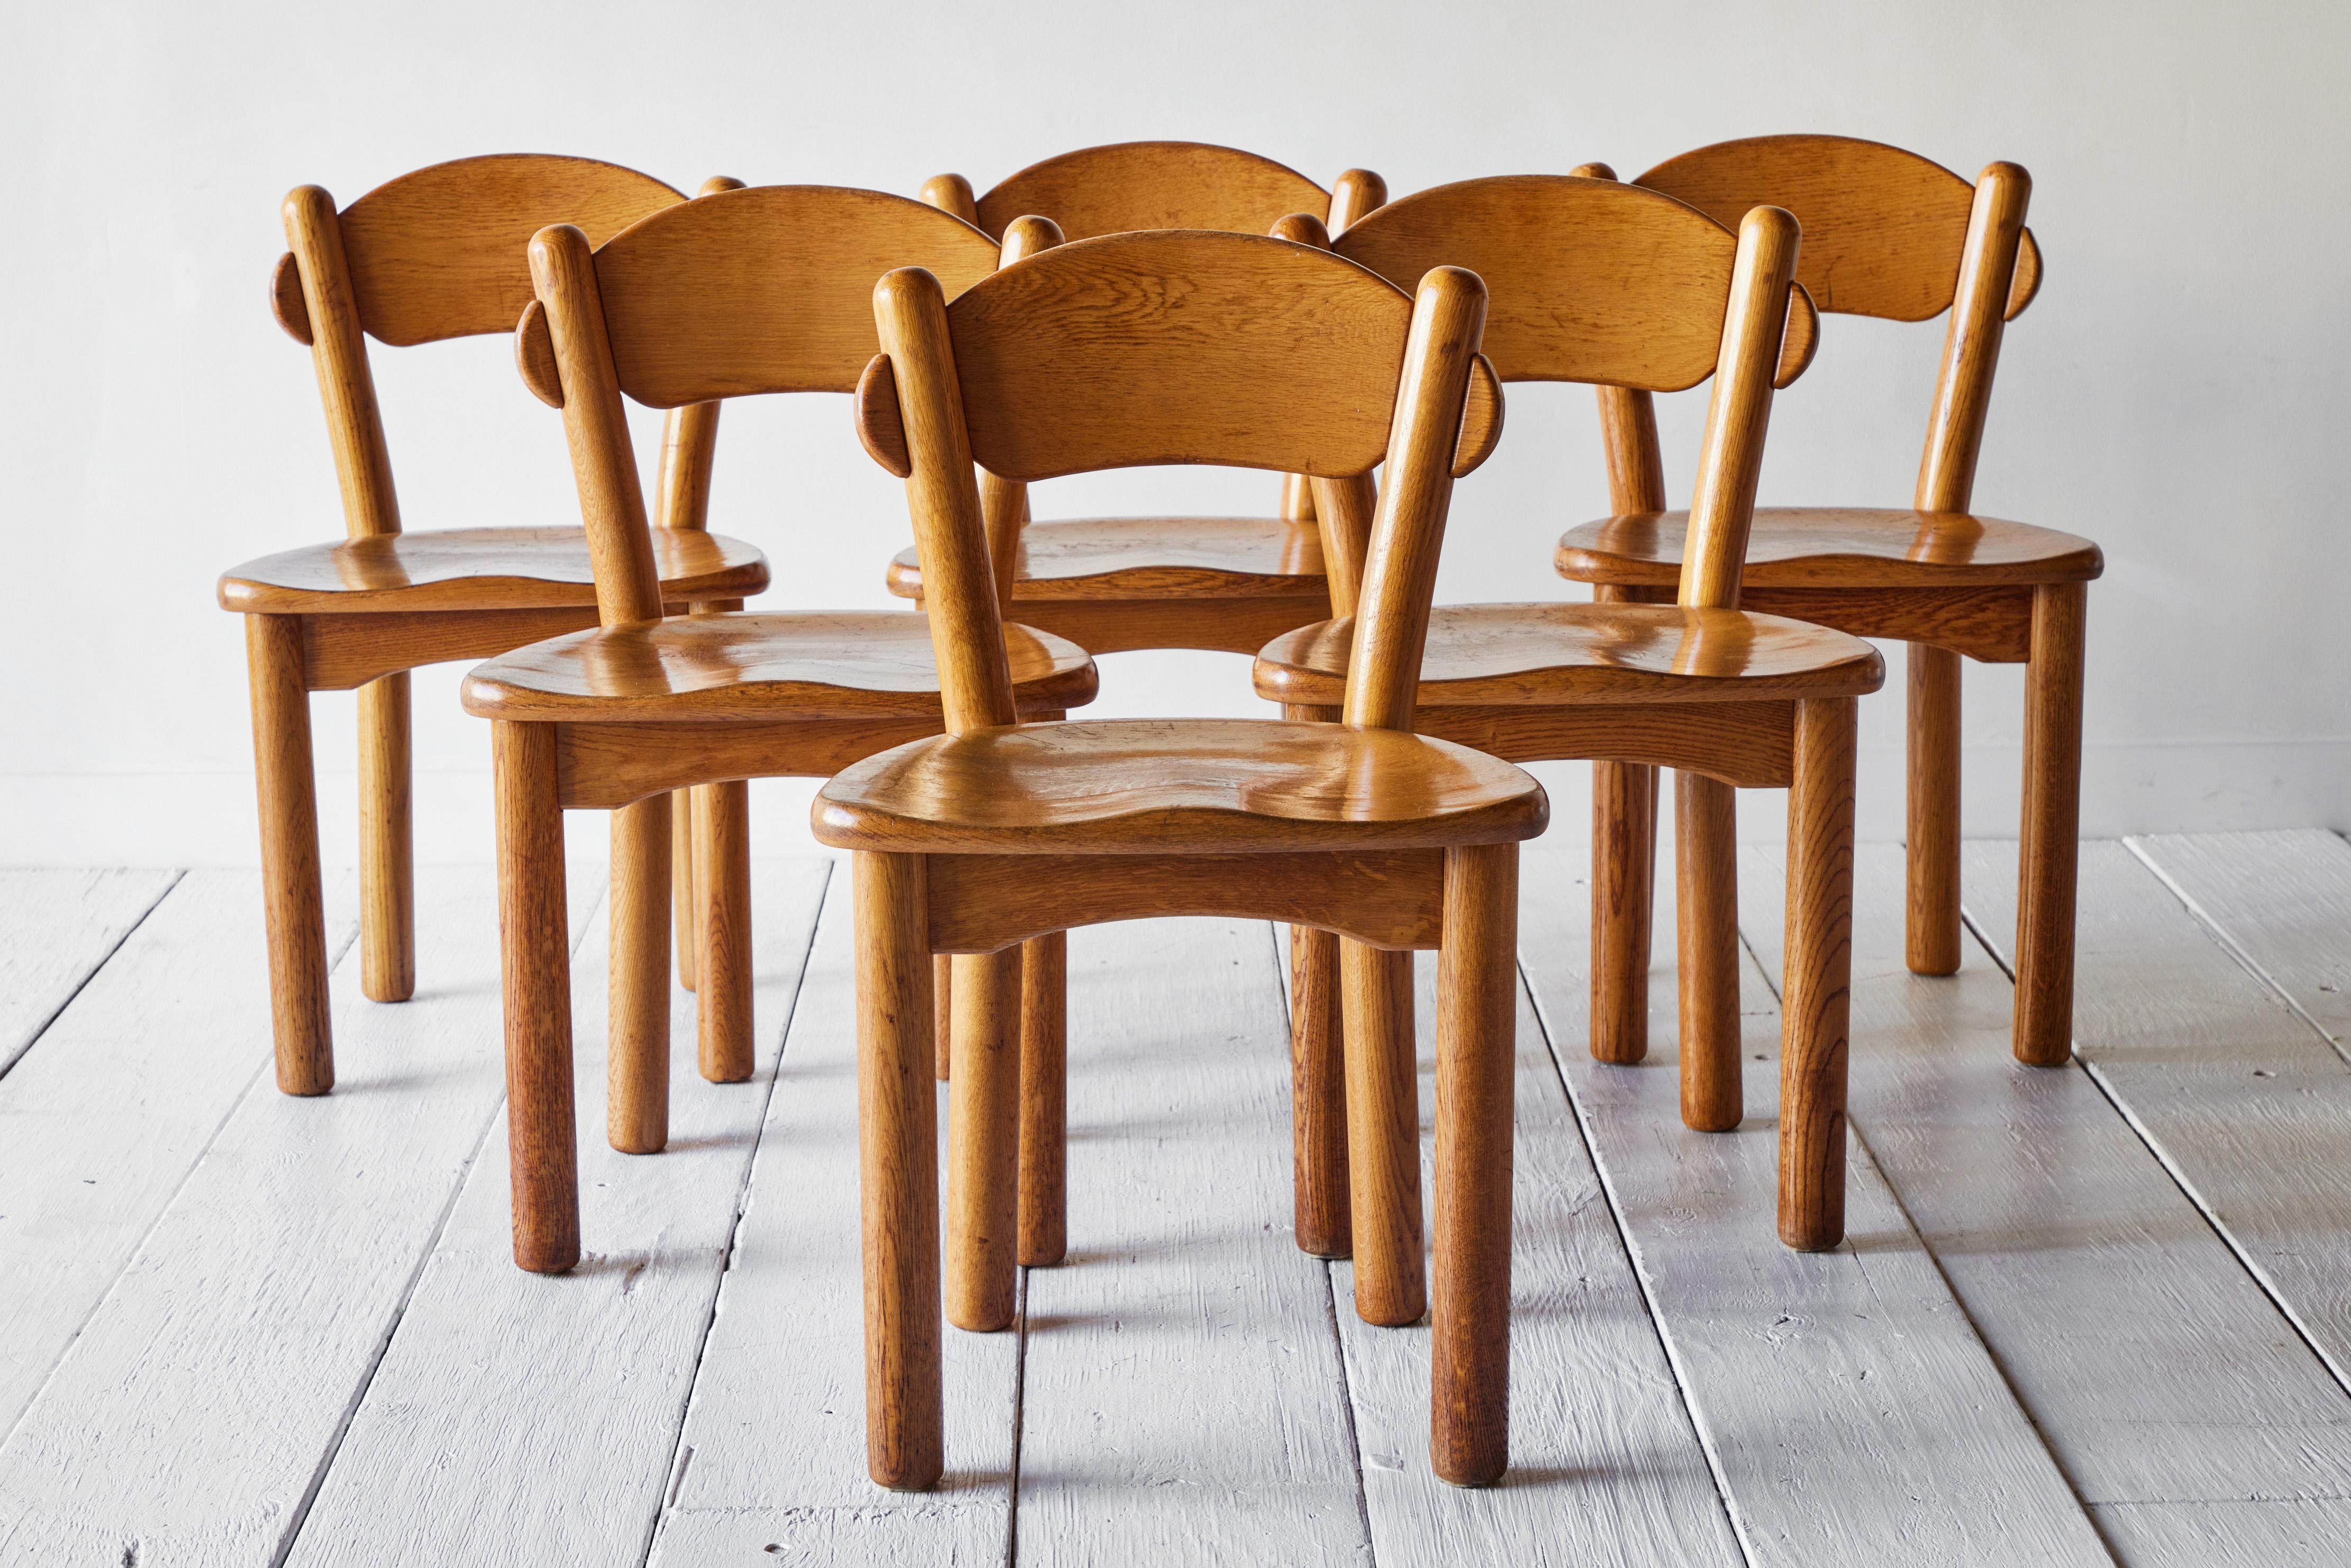 Set of six solid pine wood chairs designed by Rainer Daumiller and manufactured by Hirtshals Savvaerk in the 1970s. The chairs have a carved seat and backrest which give them a robust and organic appearance.The rustic pine wood boasts a rich and